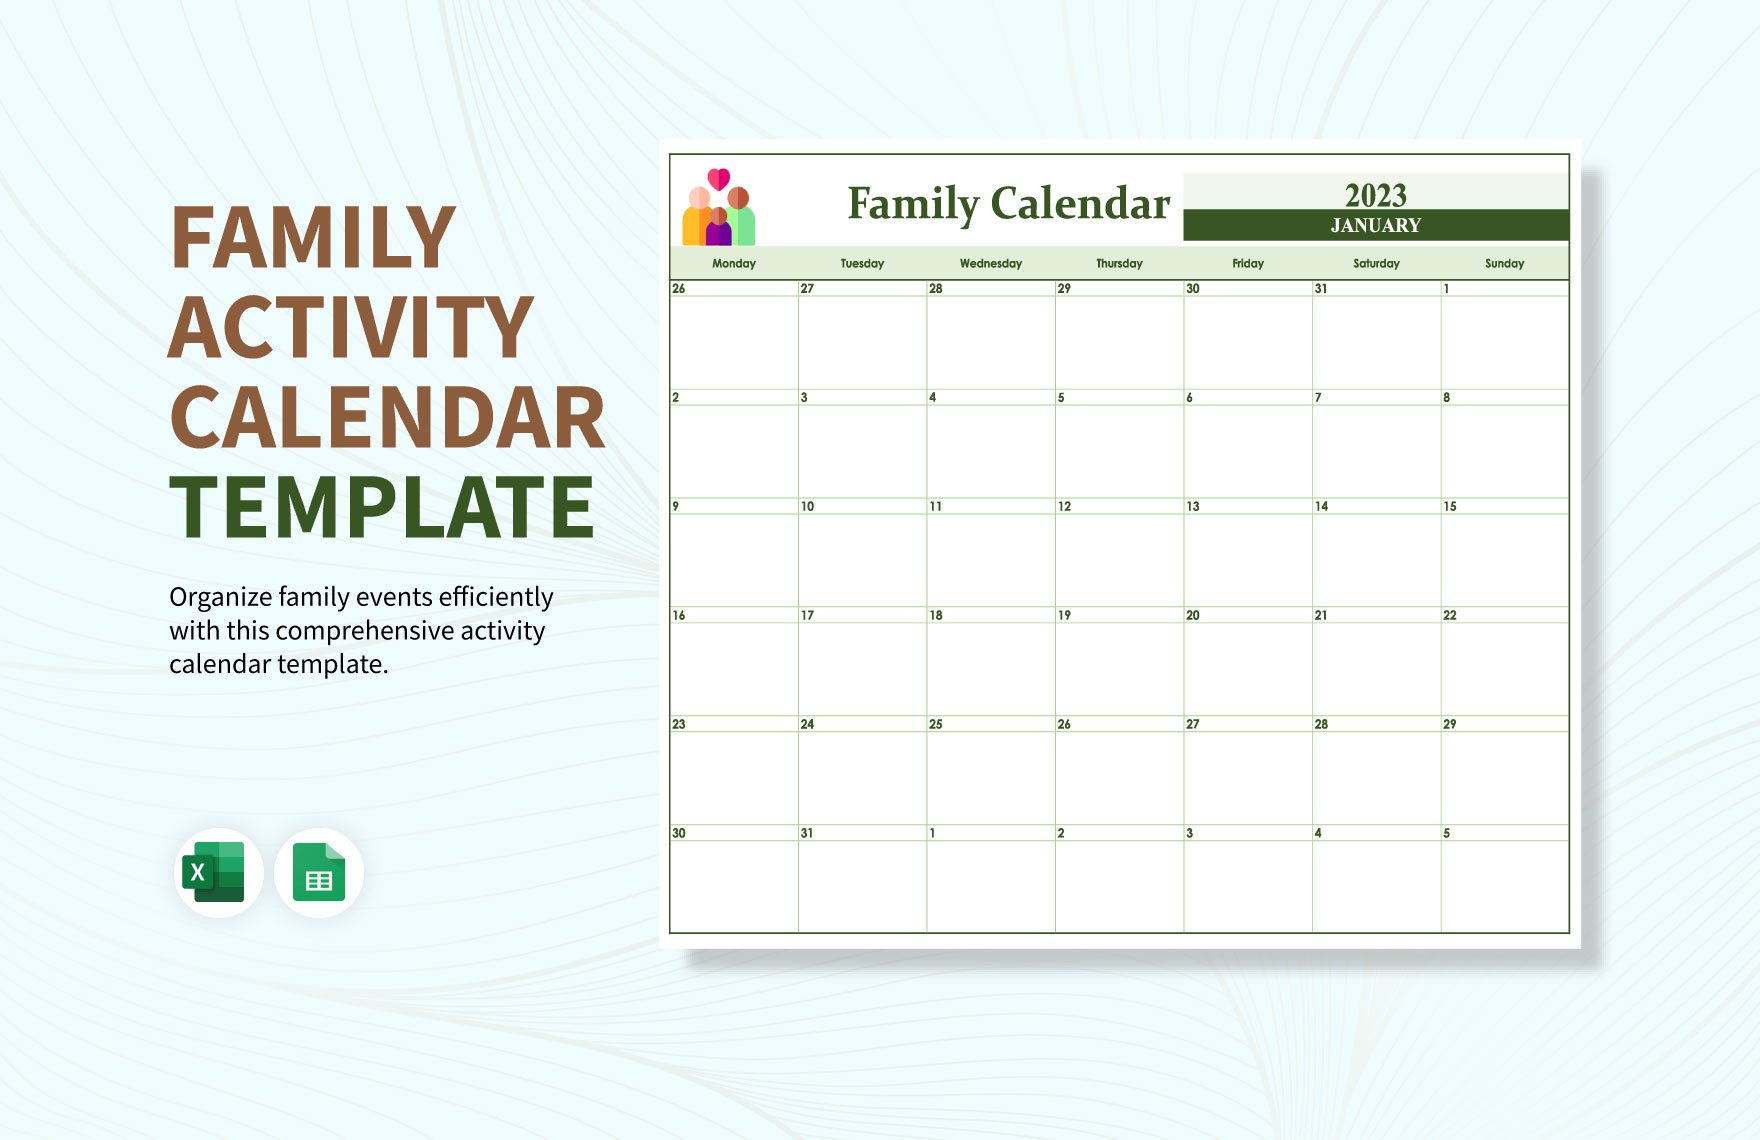 Family Activity Calendar Template in Excel, Google Sheets